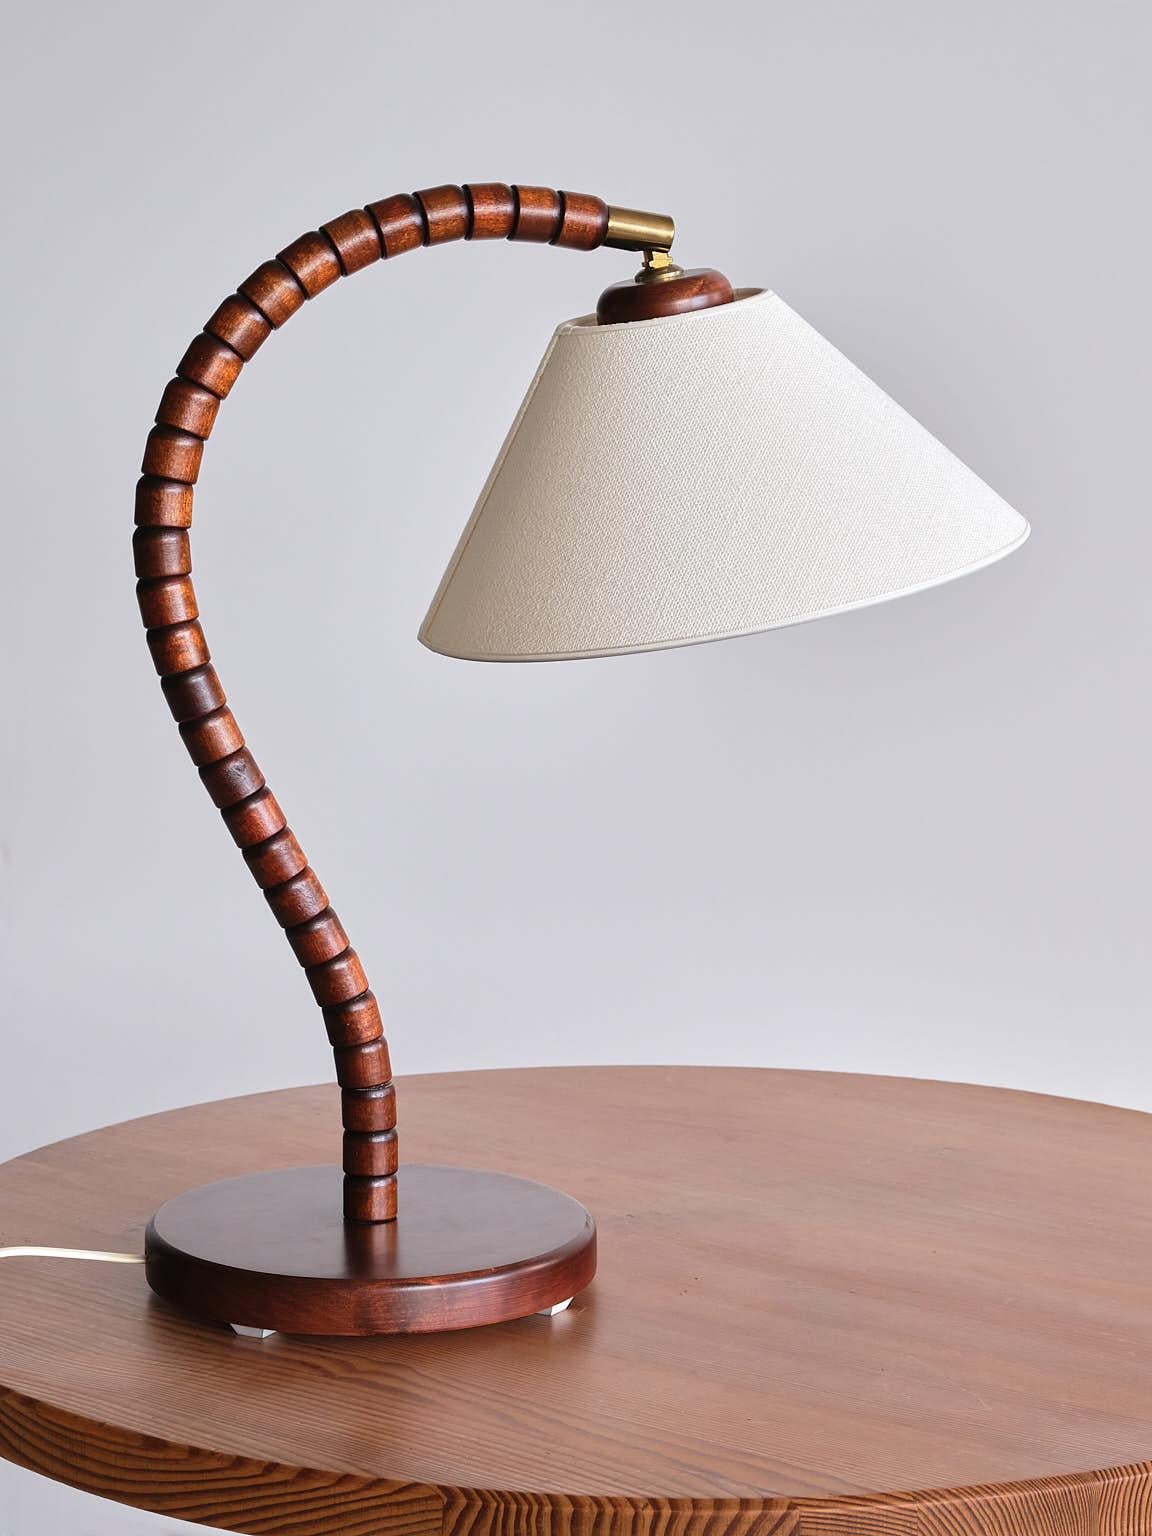 This striking table lamp was produced by Markslöjd in Kinna, Sweden in the 1970s. The design is marked by the sculptural, organic shaped frame resting on a circular base. The base is made of solid stained beech wood. Brass and beech wood fitting.